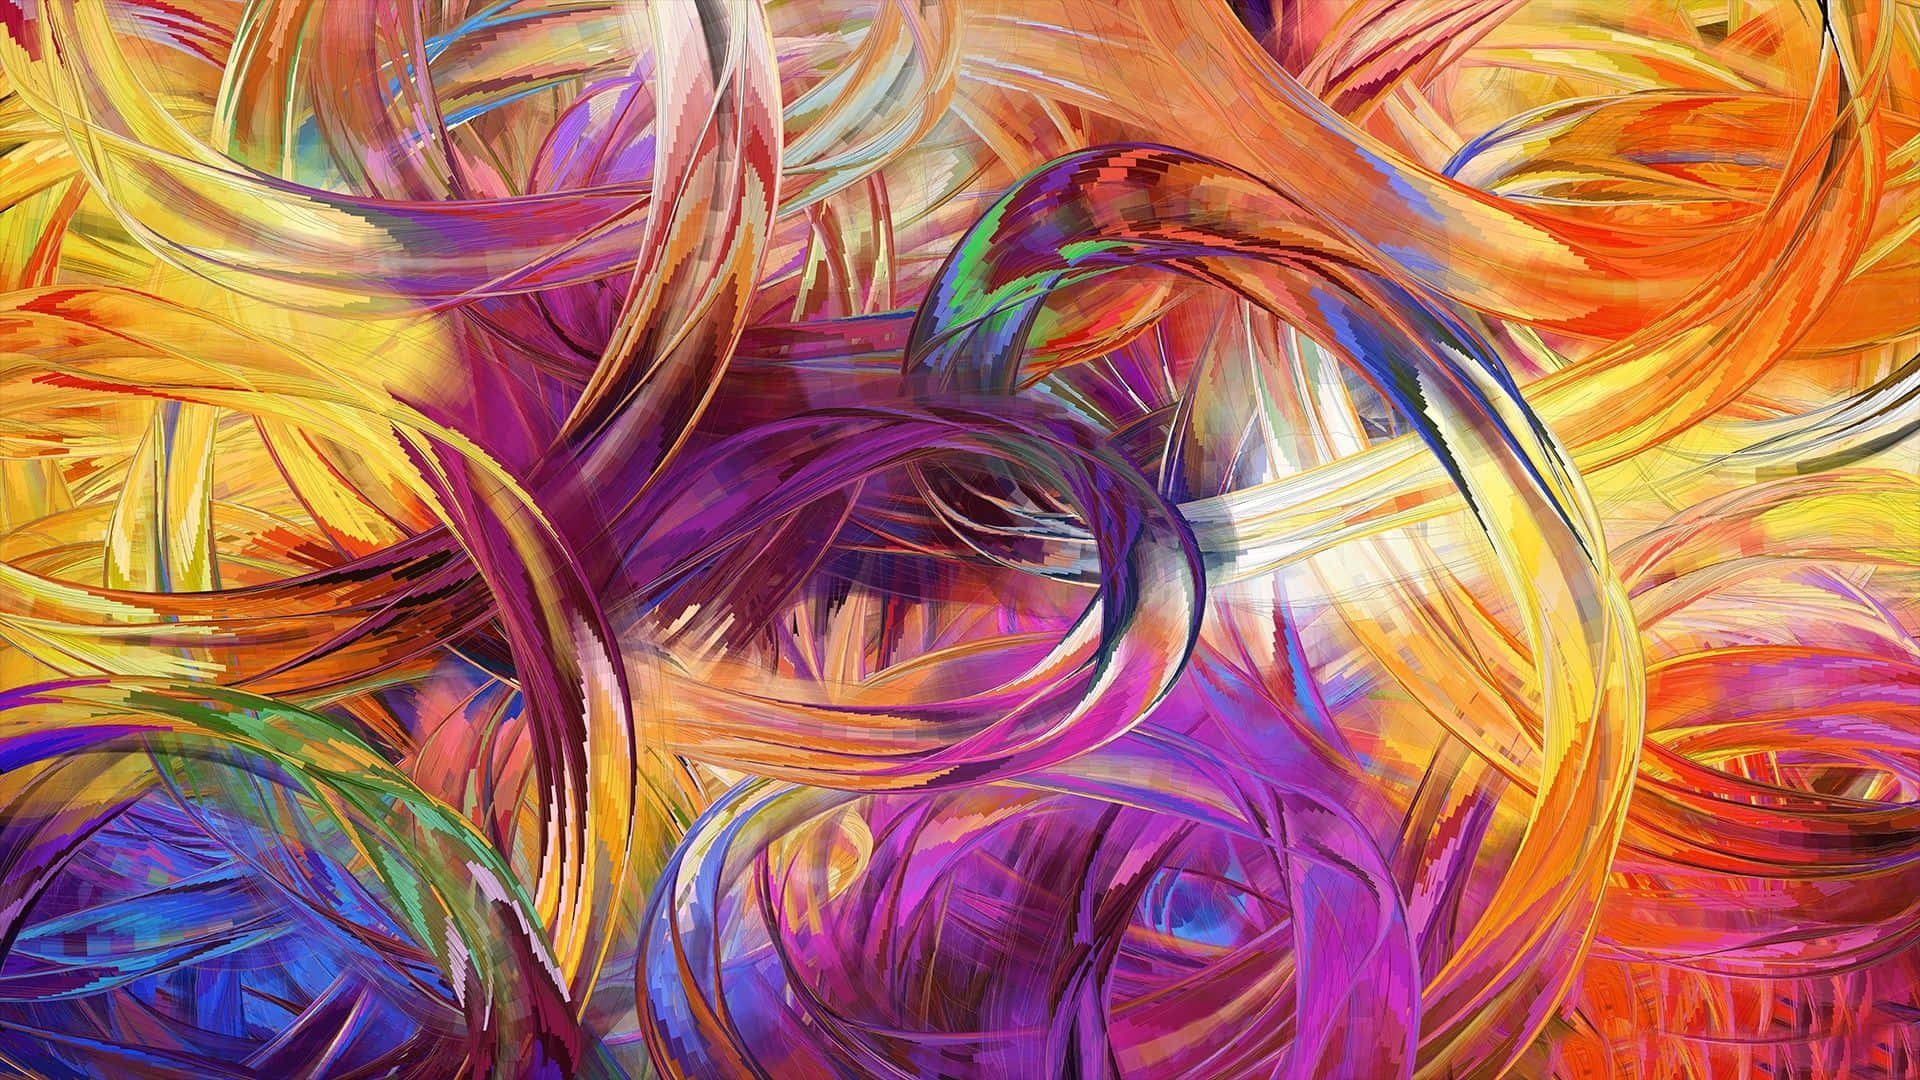 A Colorful Abstract Painting With Colorful Swirls